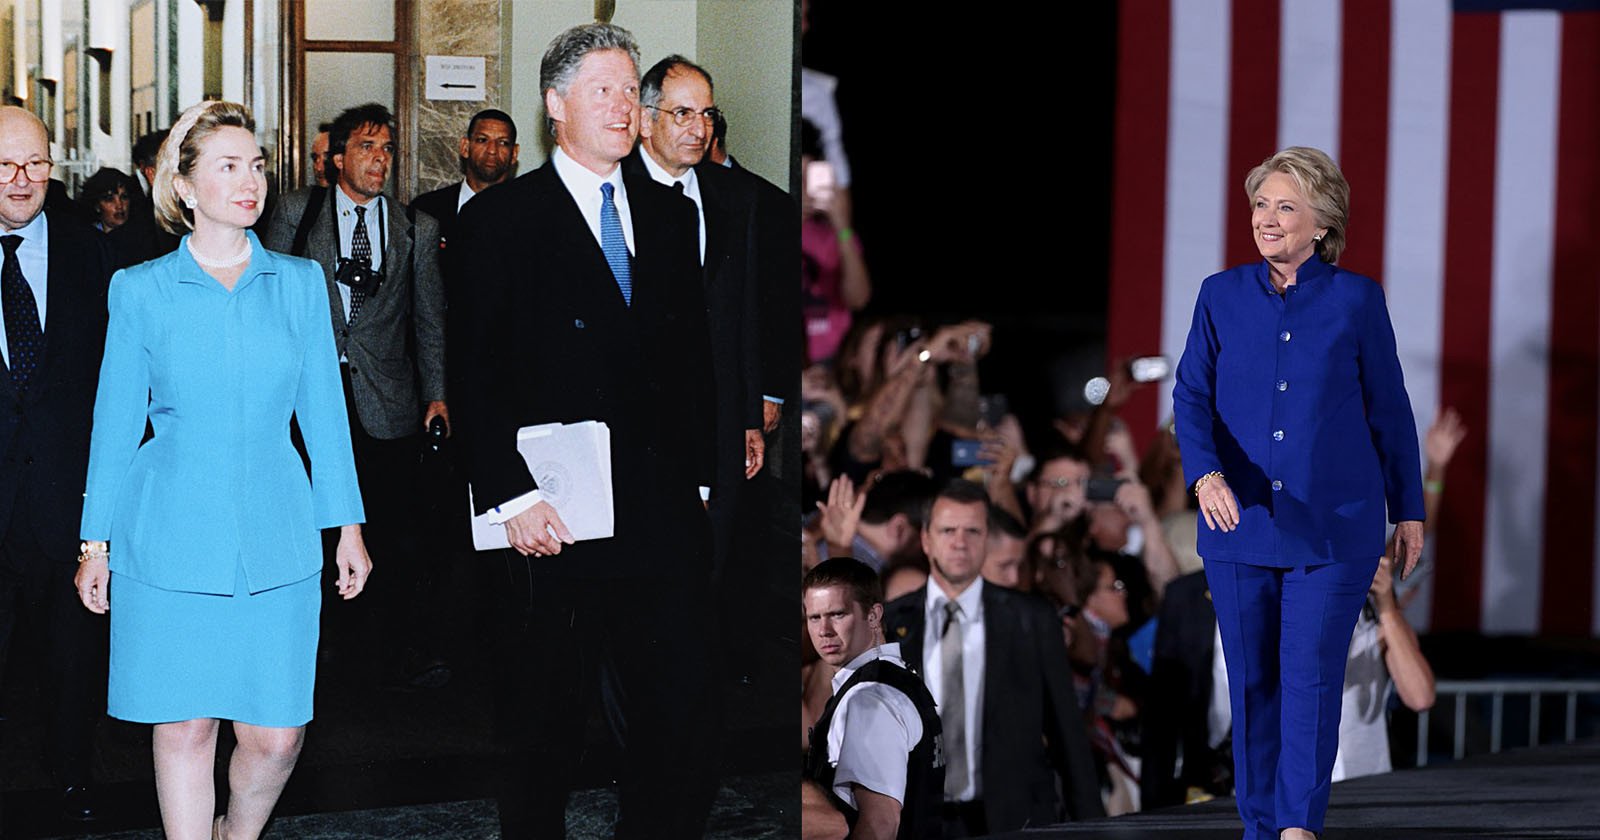 Hillary Clinton Switched to Pantsuits After Suggestive Upskirt Photos